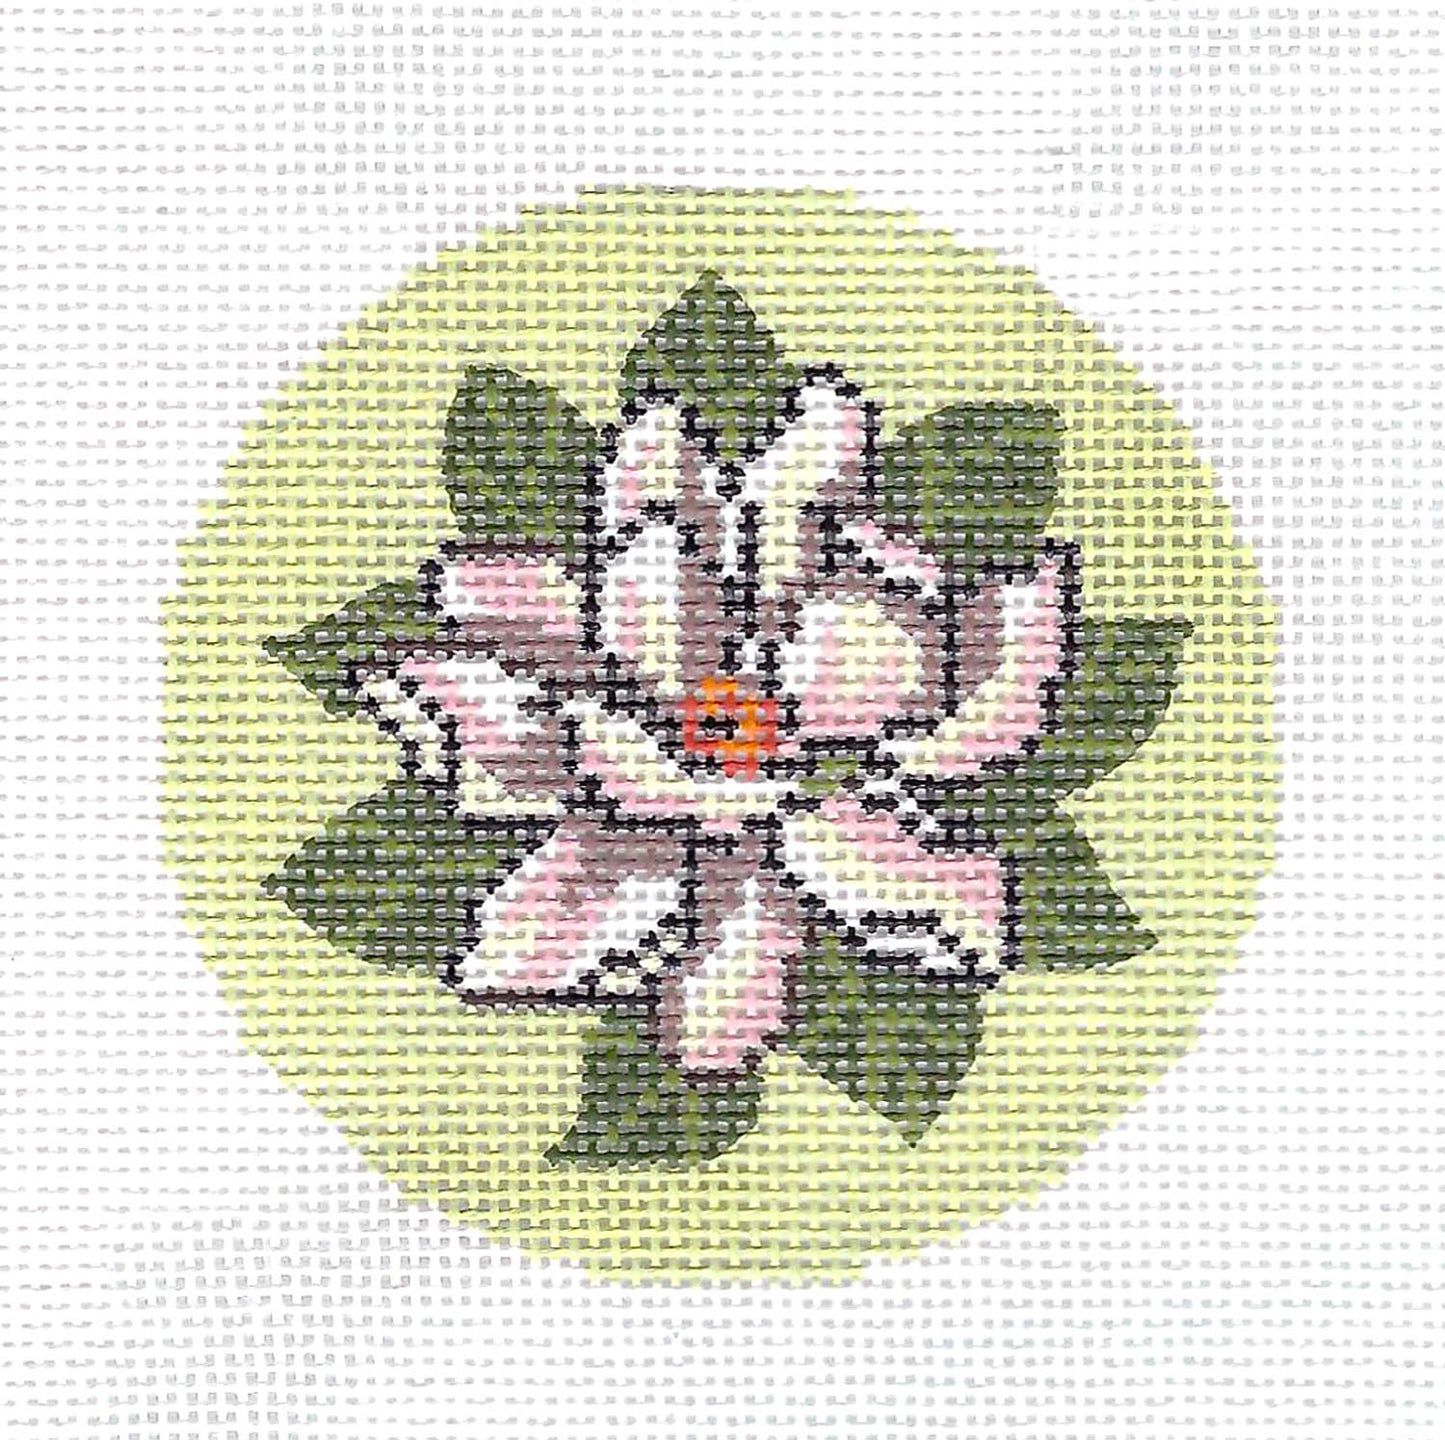 Round ~ Magnolia Blossom Flower 3" Rd. 18 mesh handpainted Needlepoint Canvas Ornament or Insert by LEE